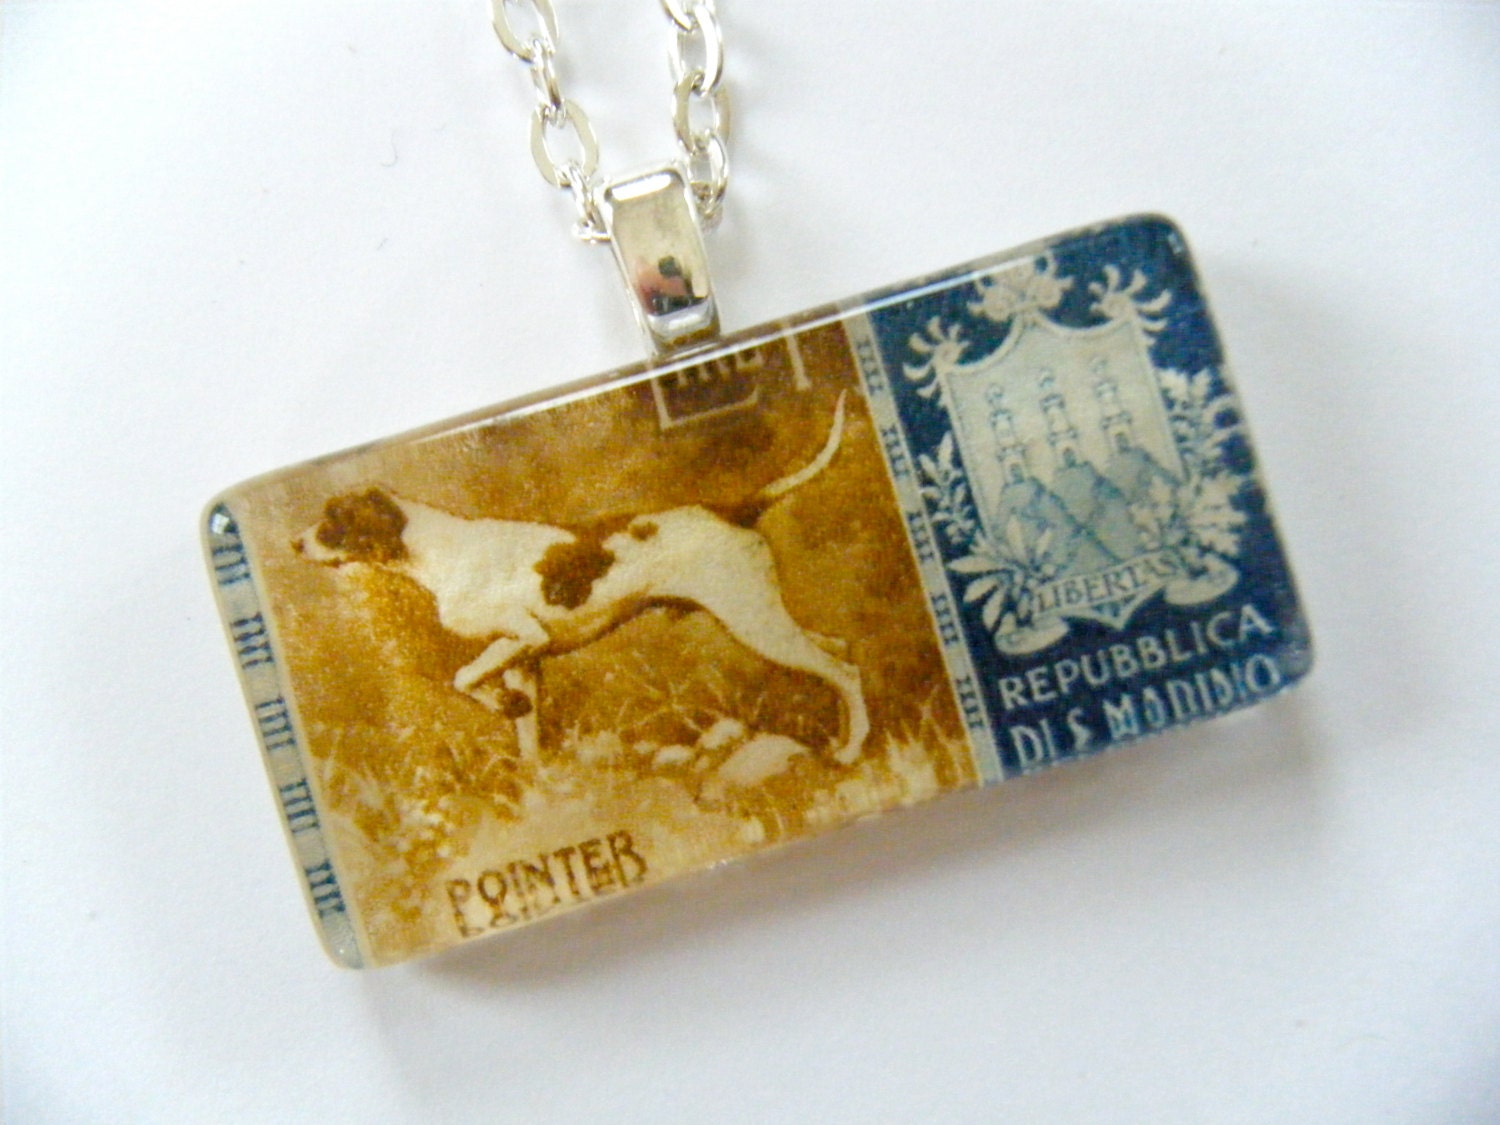 OOAK Pointer Dog Italy Postage Stamp Glass Tile Pendant Republic San Marino Recycled Material Upcycled Paper Postal Italian Necklace Pendant - HeidiKindFinds